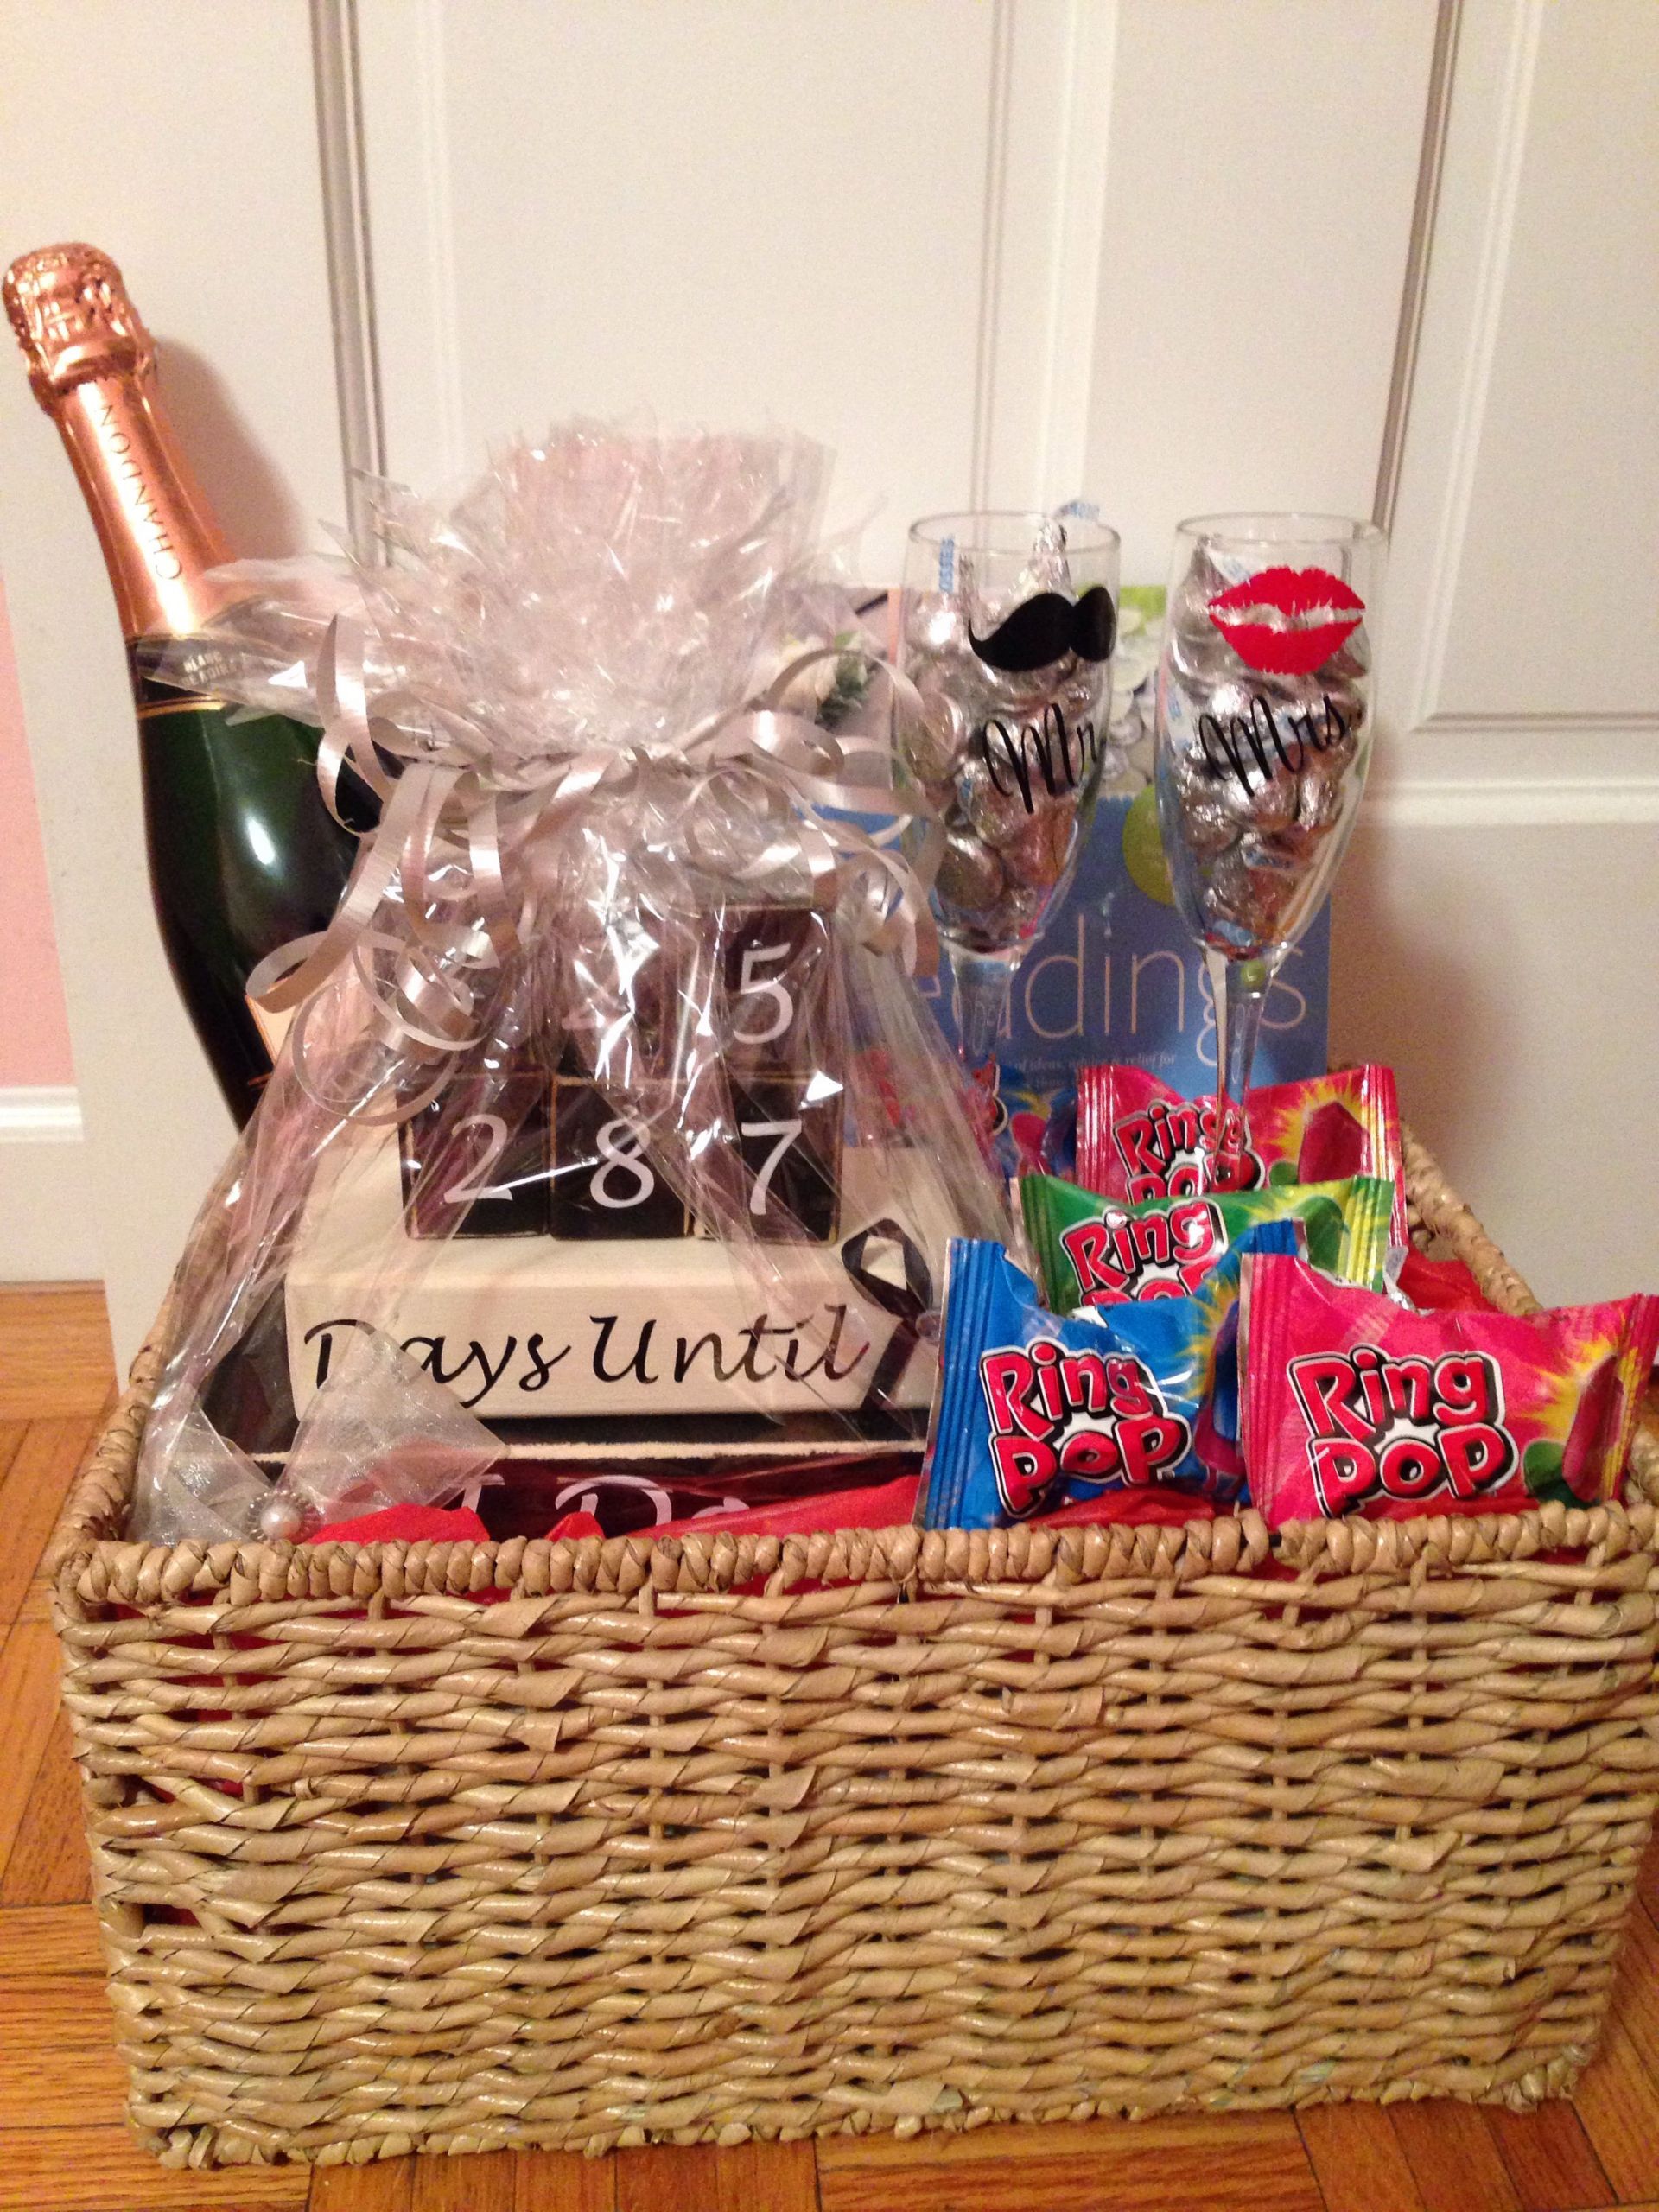 DIY Wedding Gift Baskets
 engagement t basket champagne glasses countdown to